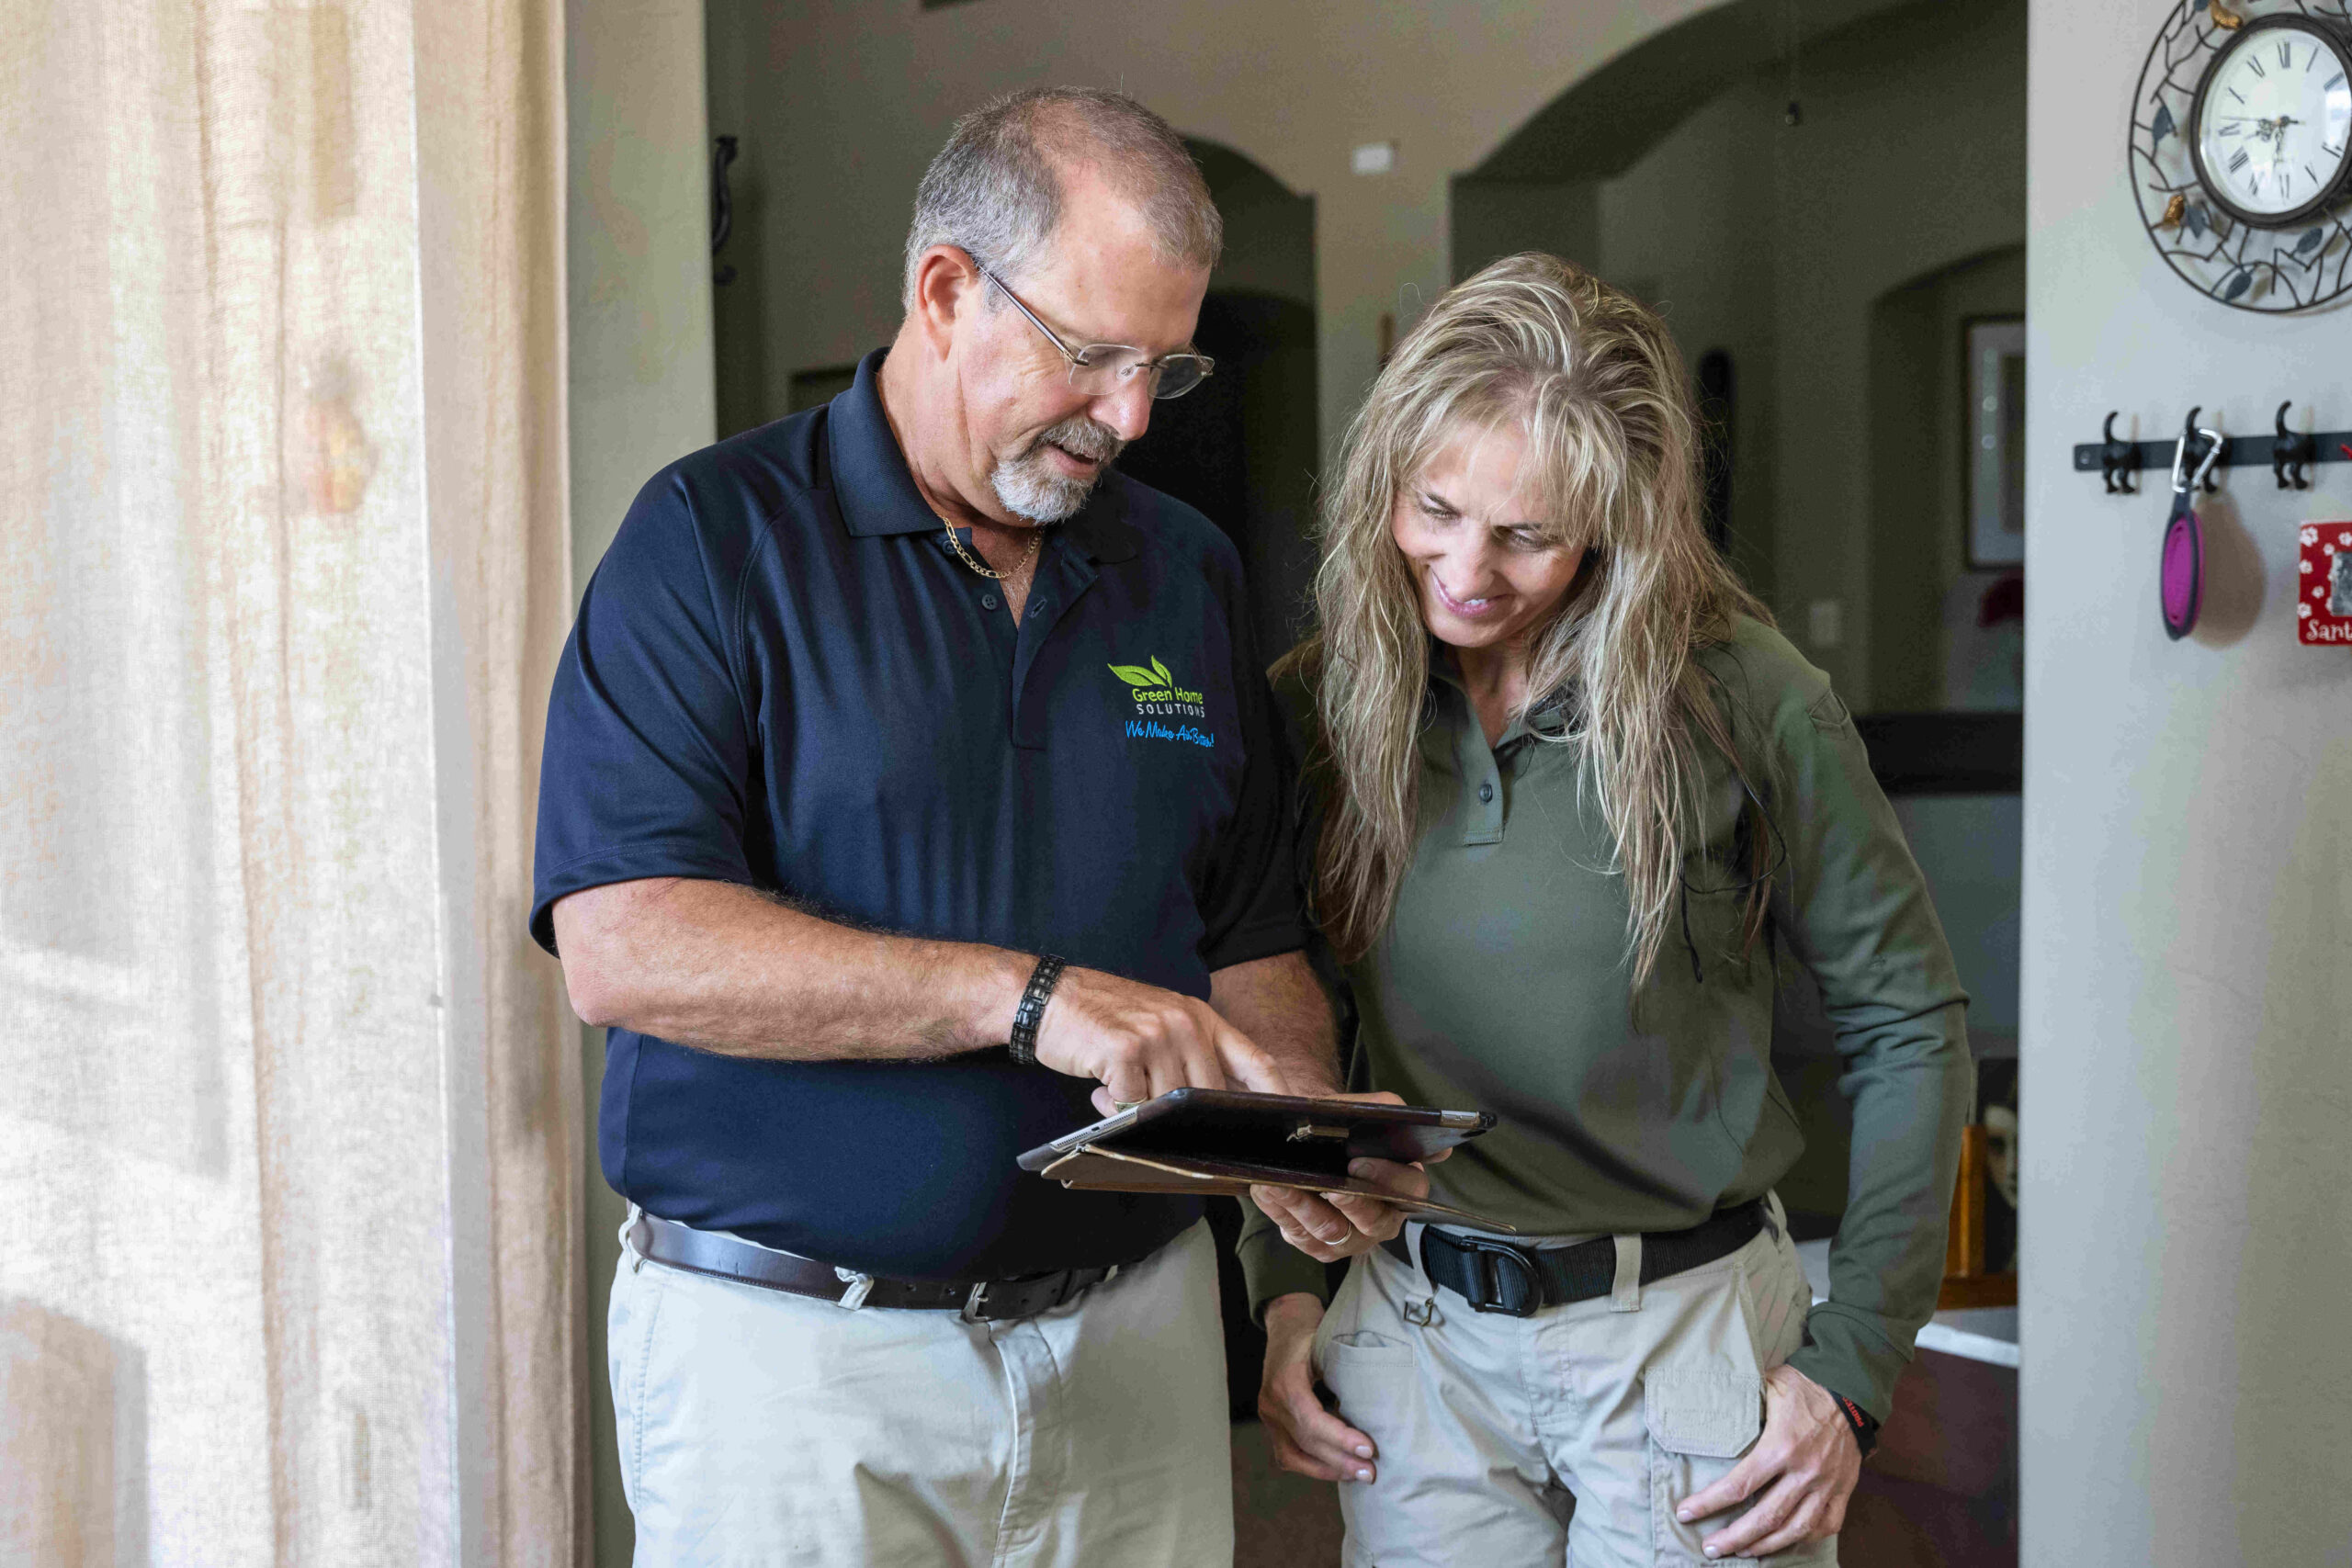 mold technician reviews results with a customer in her kitchen on an ipad